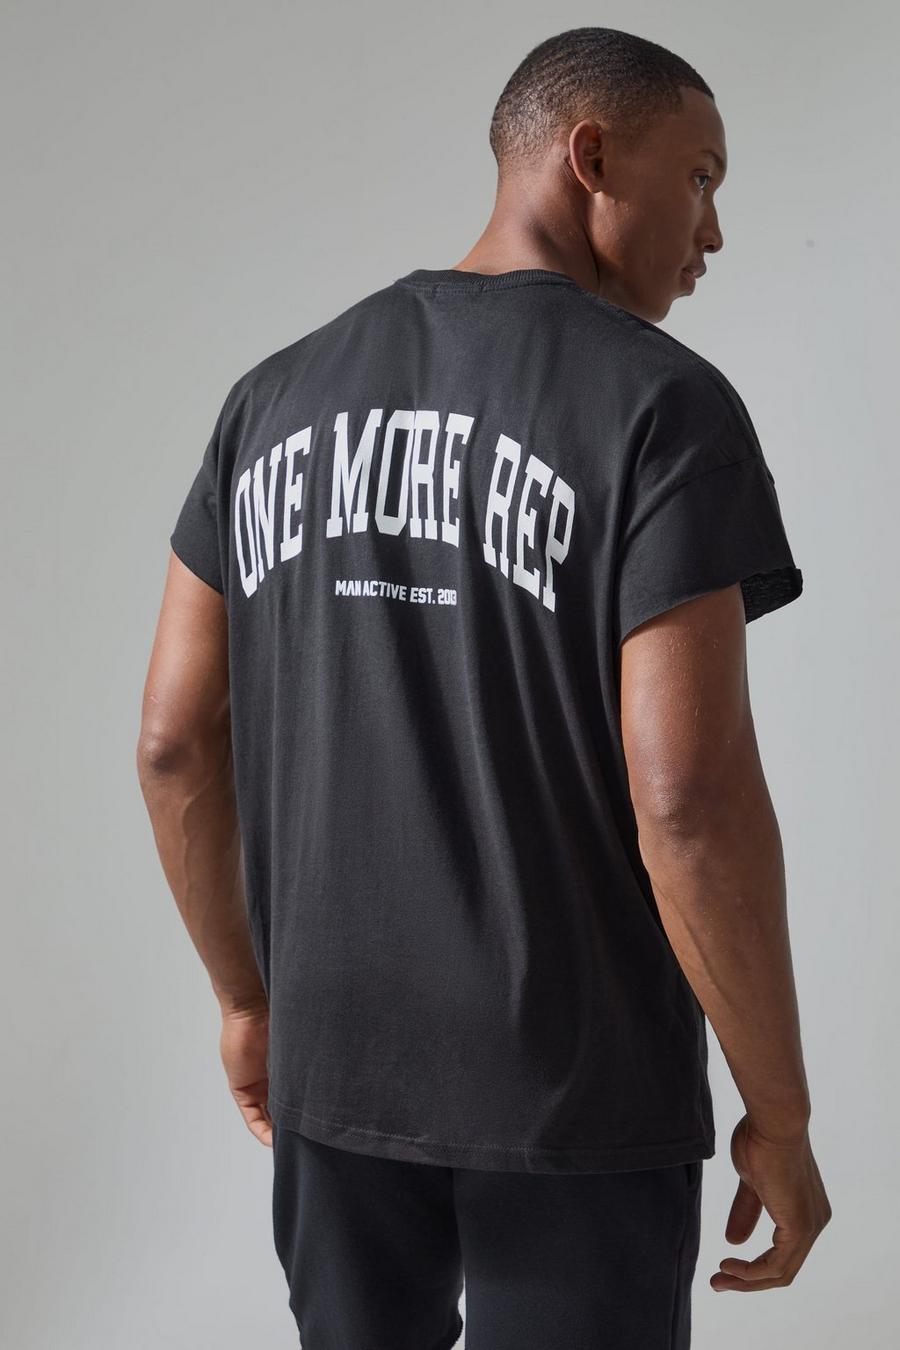 Man Active Oversized One More Rep T-shirt, Black image number 1